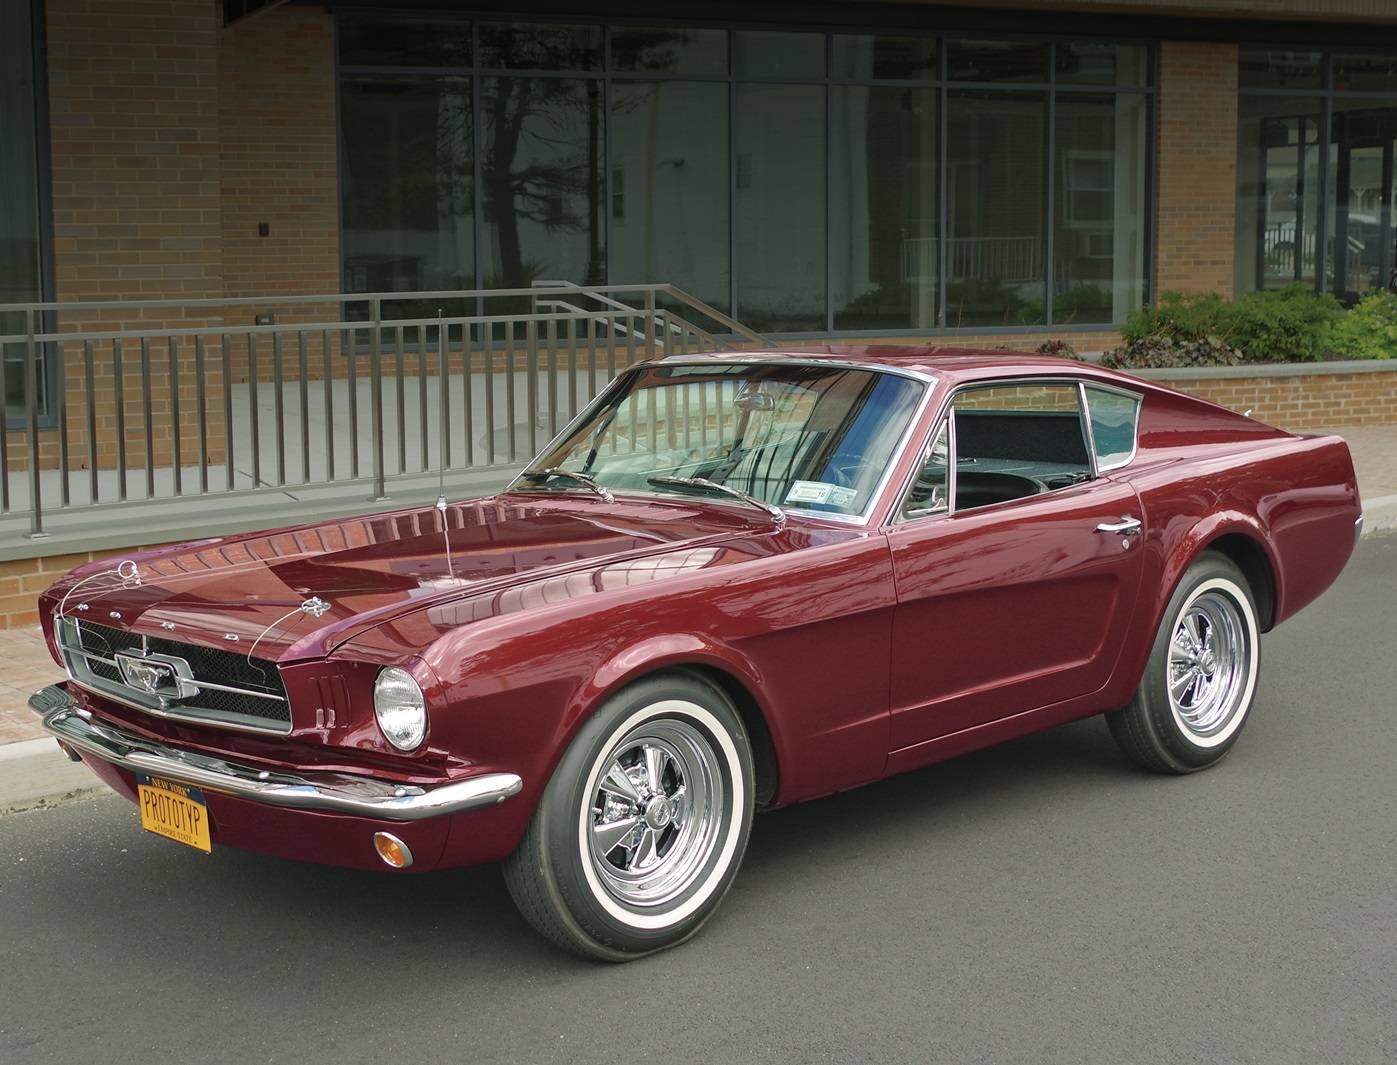 Мустанг 60. Форд Мустанг 1963. Форд Мустанг ГТ 1963. Форд Мустаг 60. Ford Mustang Shelby 1963.